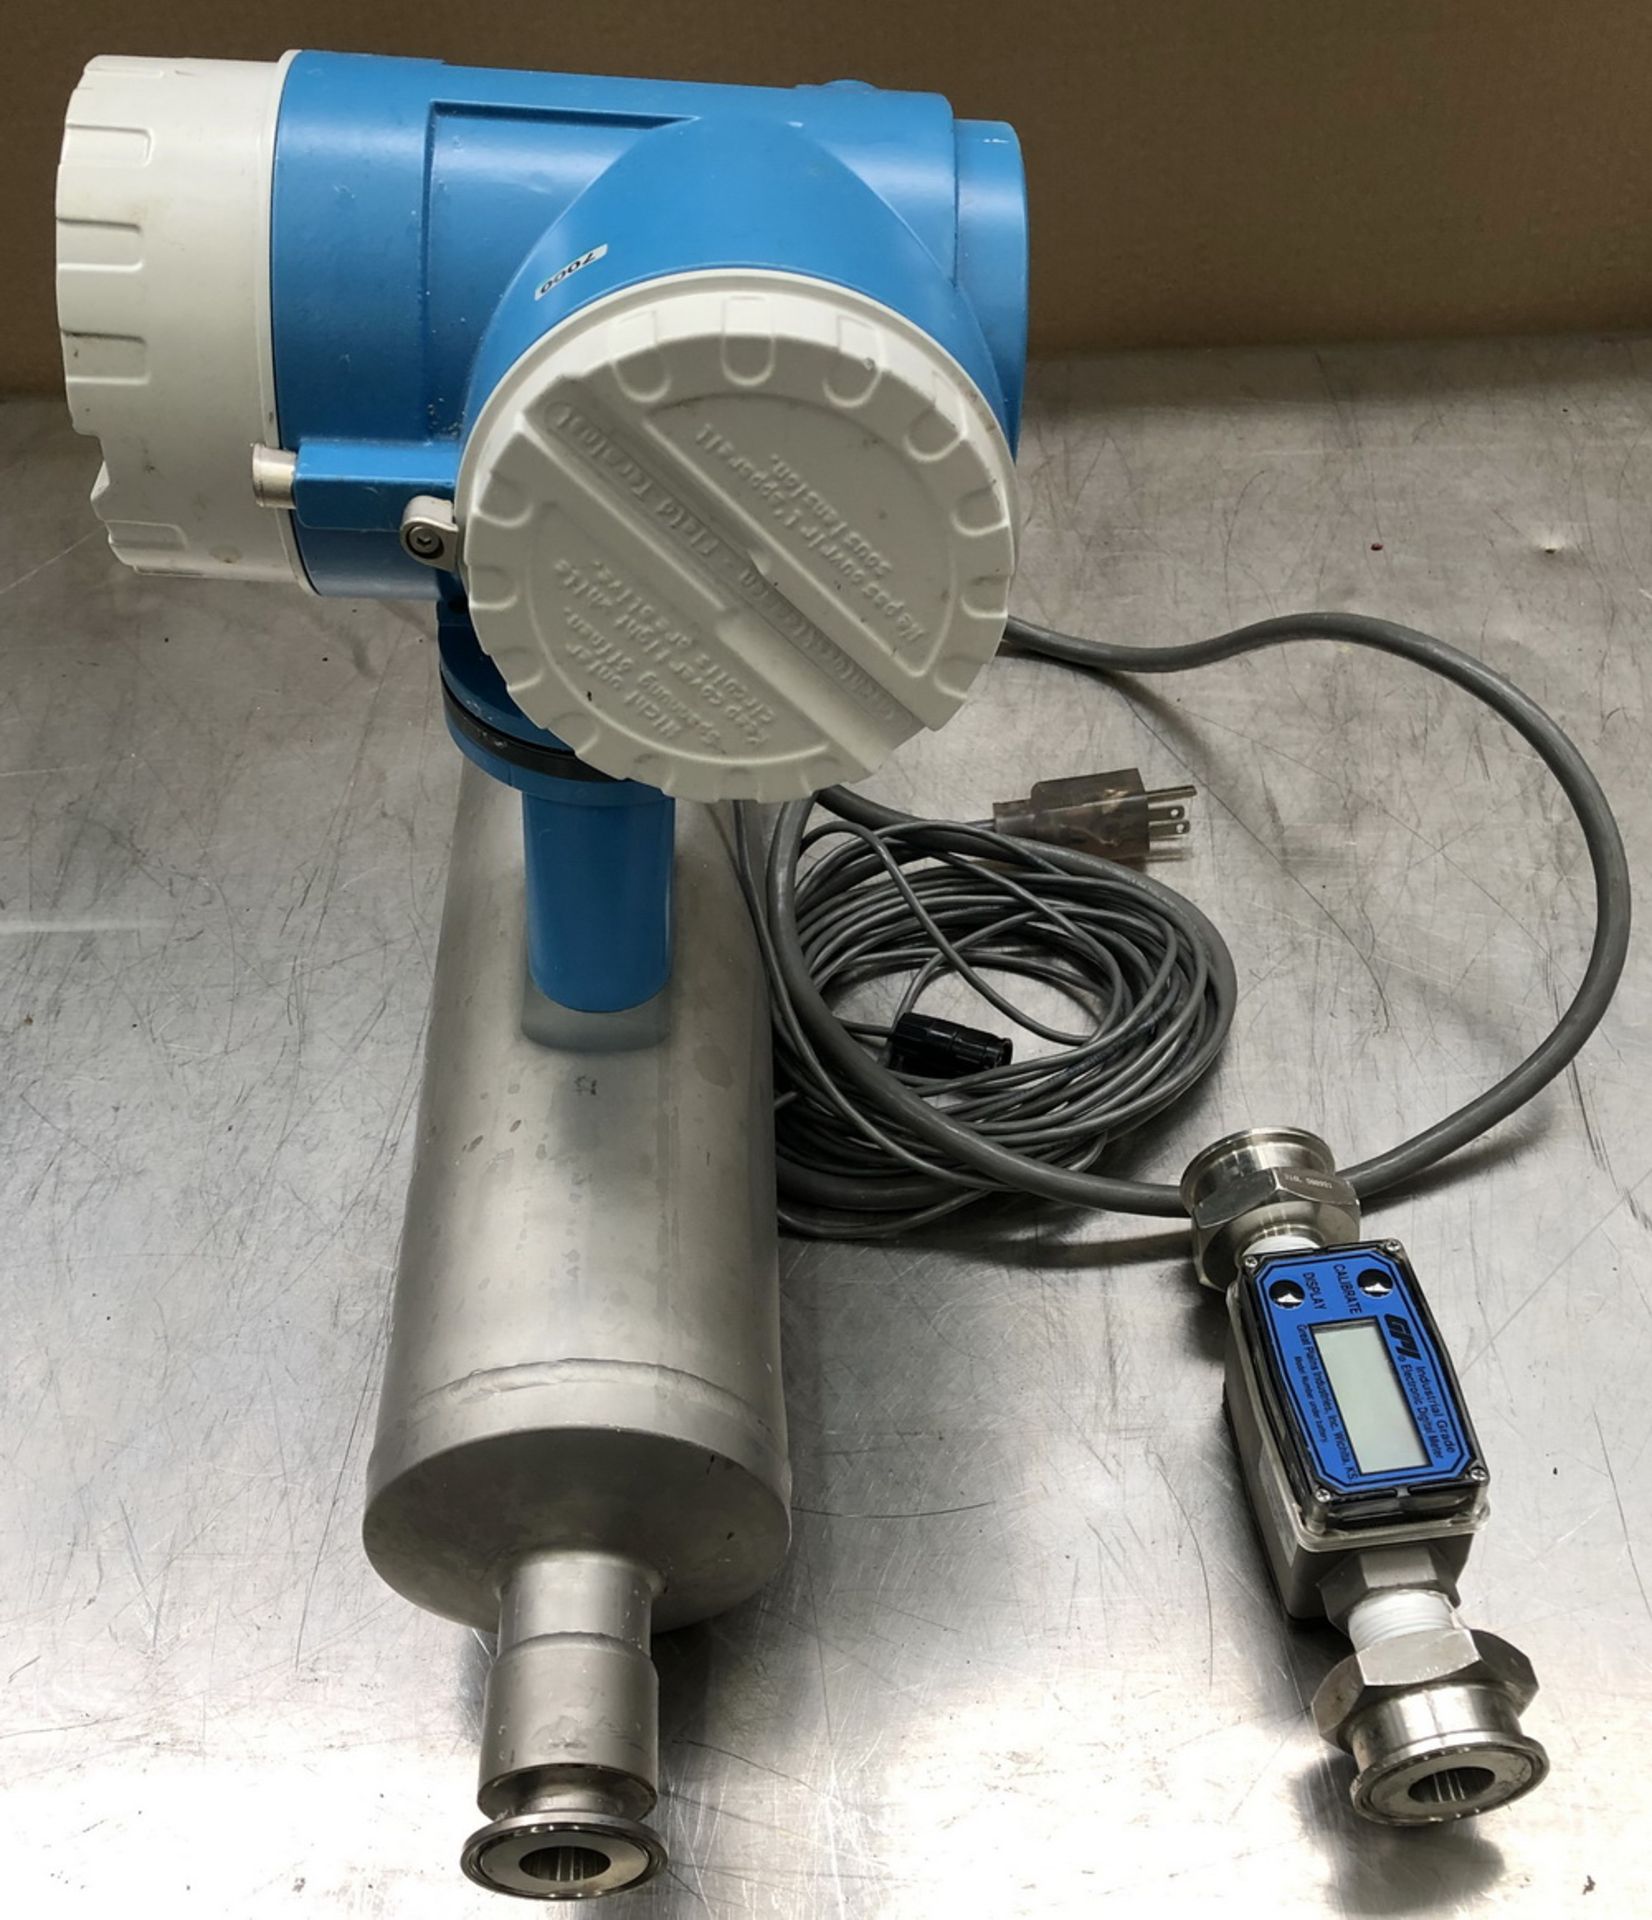 Endress and Hauser Promass Flow Meter, 1" triclamp; with GPI Electronic Flow Meter - Image 2 of 6